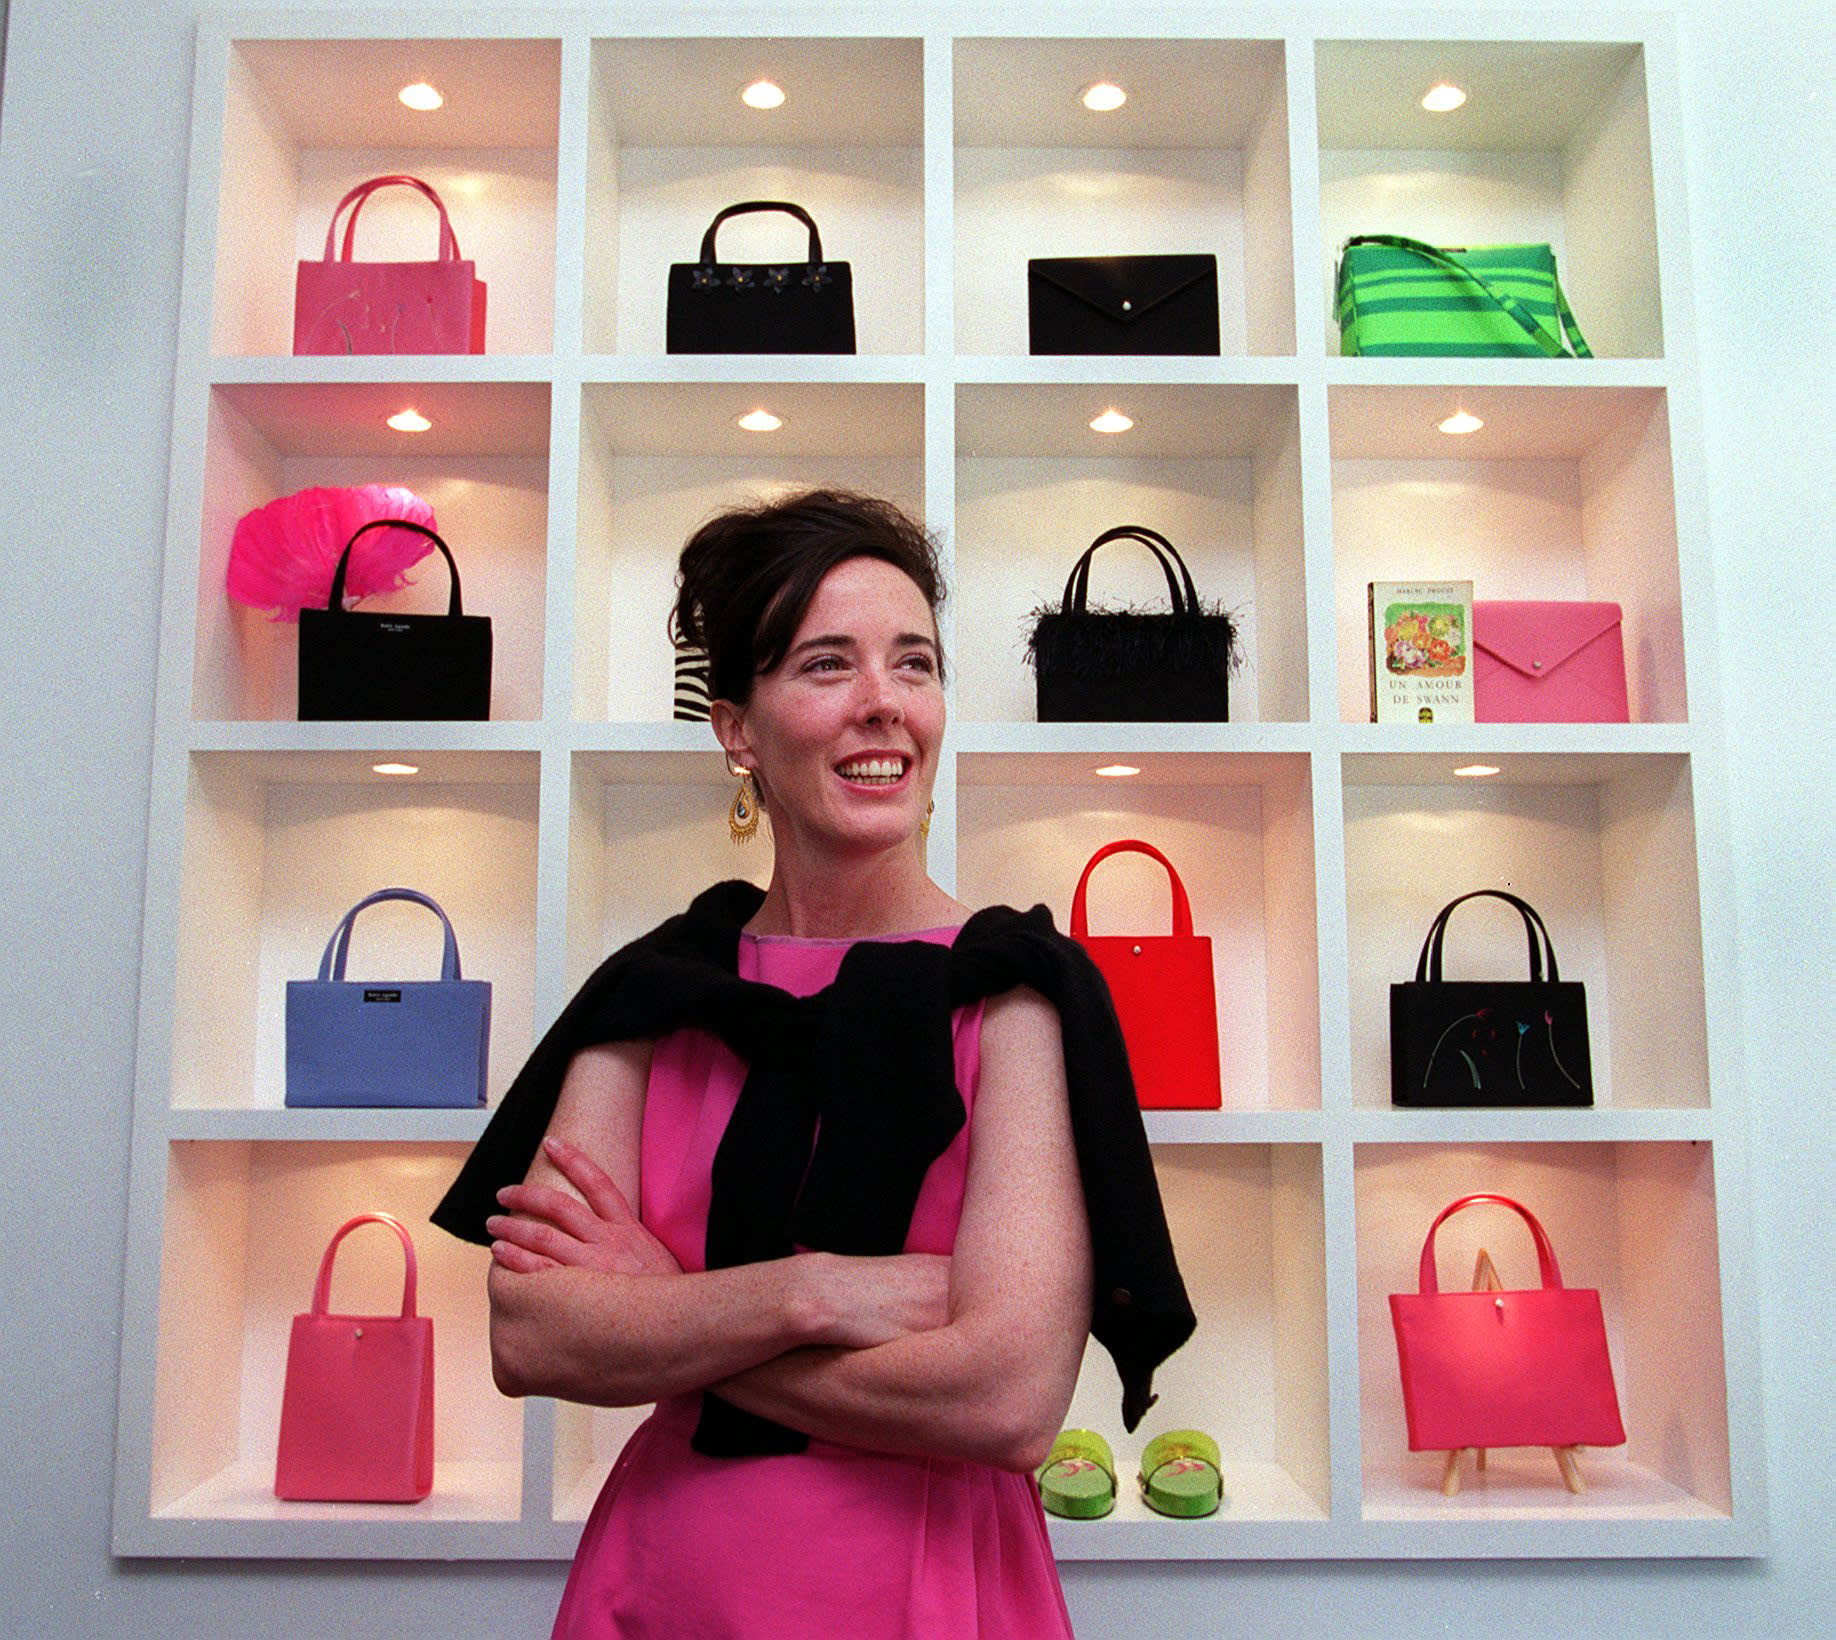 Kate Spade's legacy: A new style for the quintessential American woman